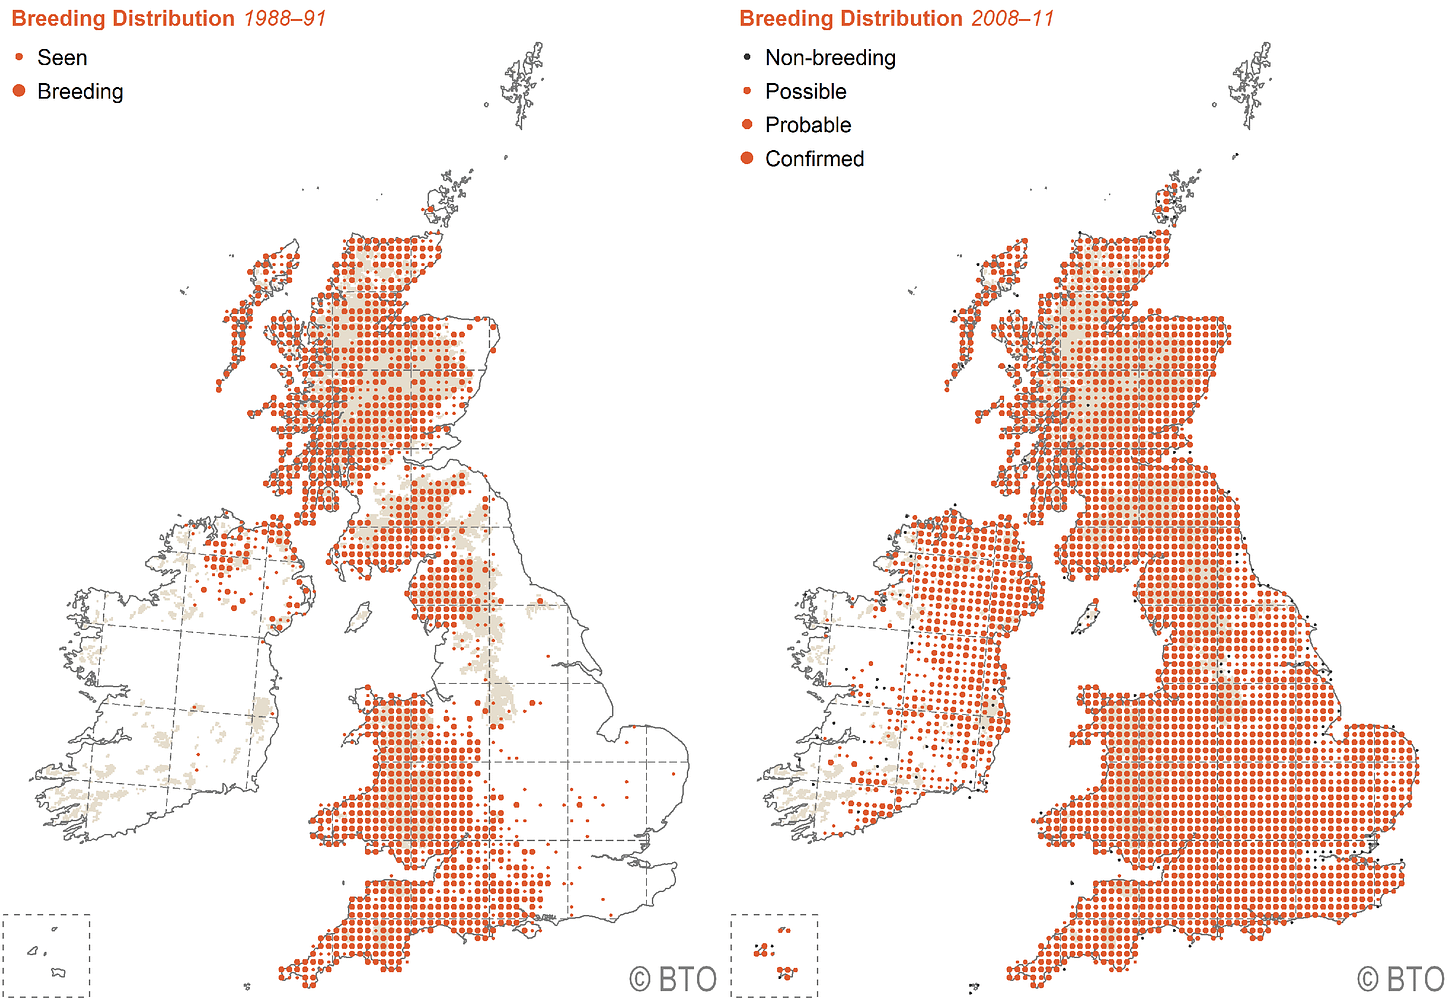 Comparison of UK distribution maps for Buzzard for 1988-1991 and 2008-2011